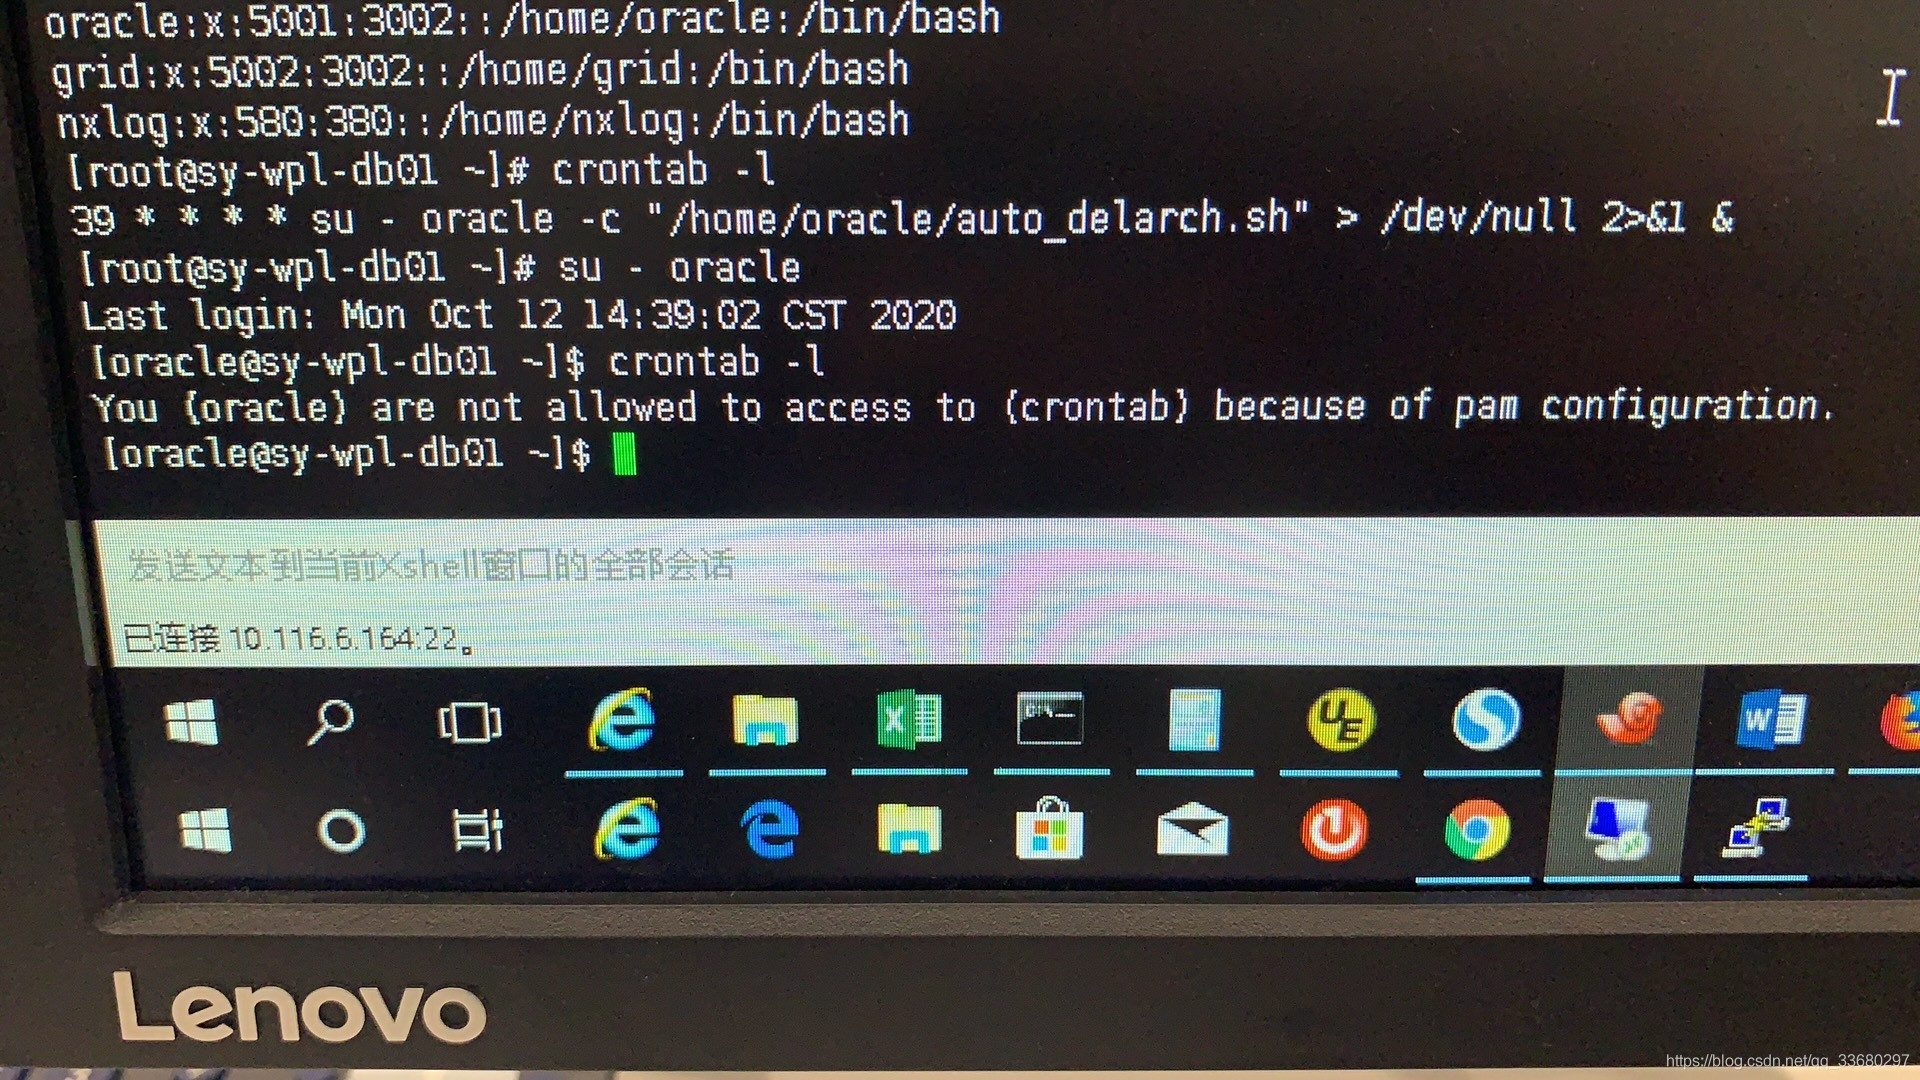 you (oracle) are not allowed to access to crontab because of pam configuraion插图